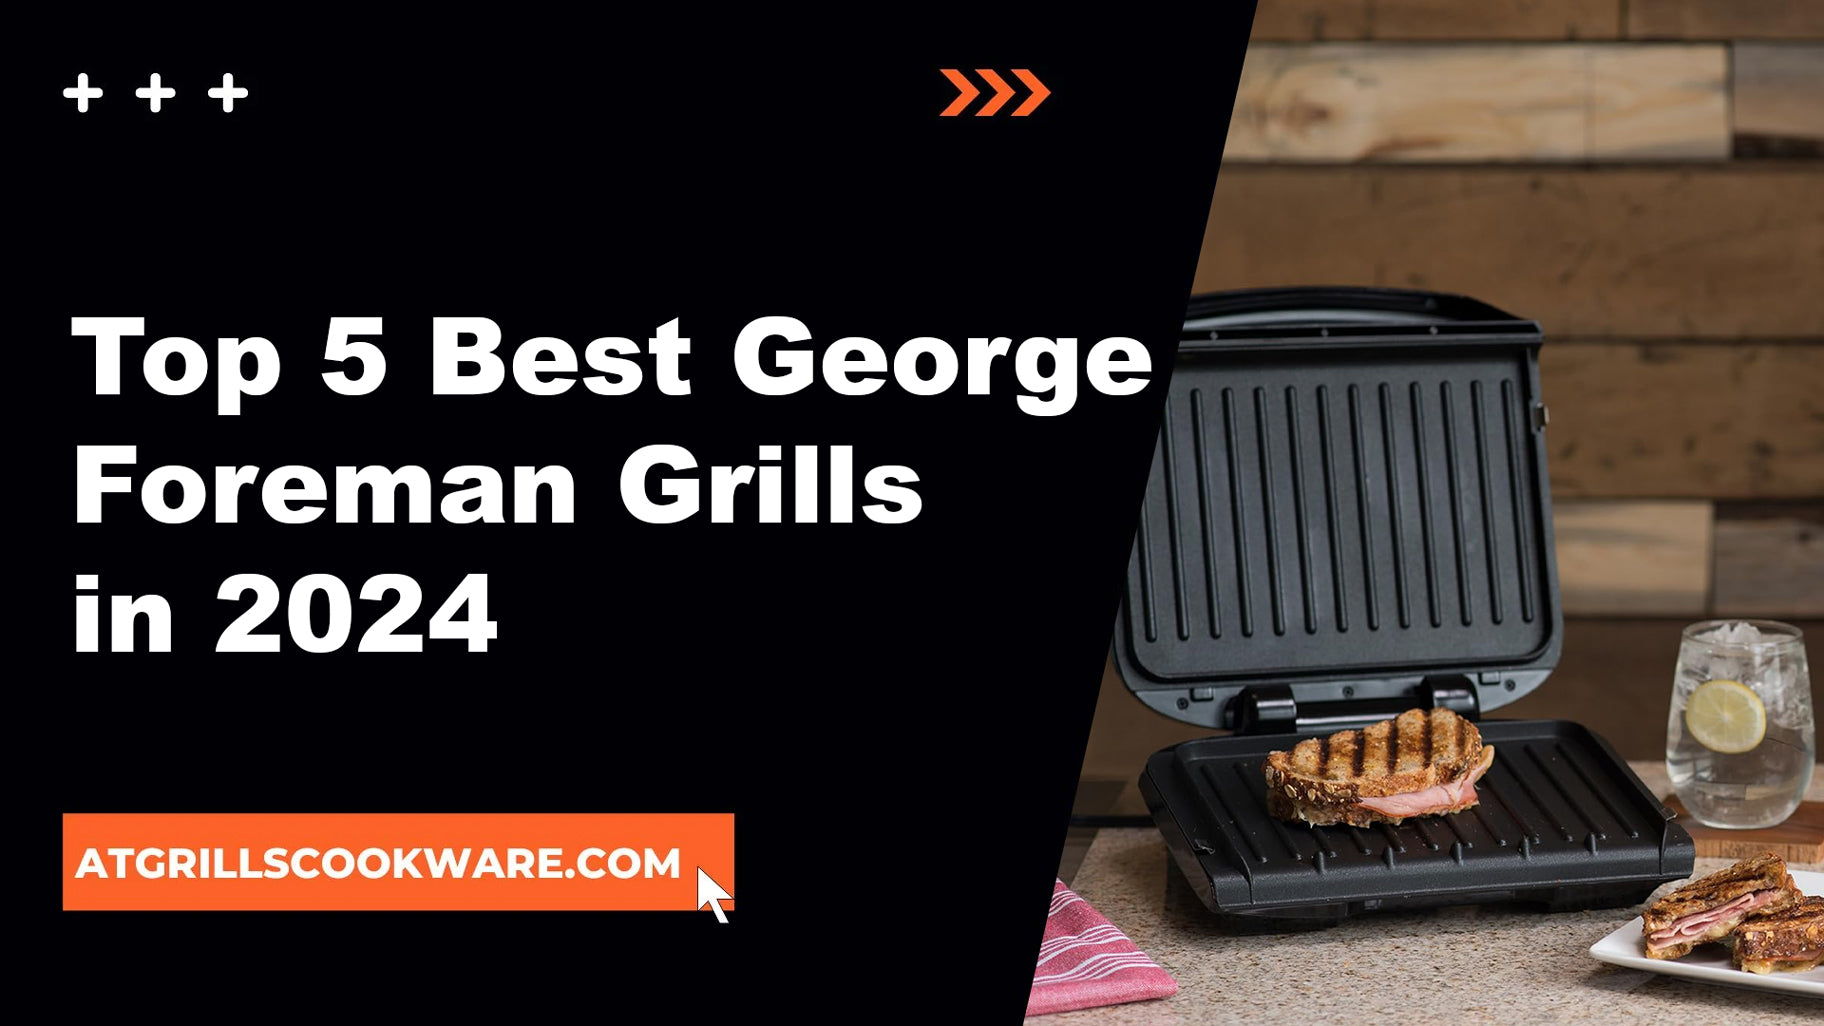 Feast with Foreman: The Top 5 George Foreman Grills to Upgrade Your Cookouts in 2024